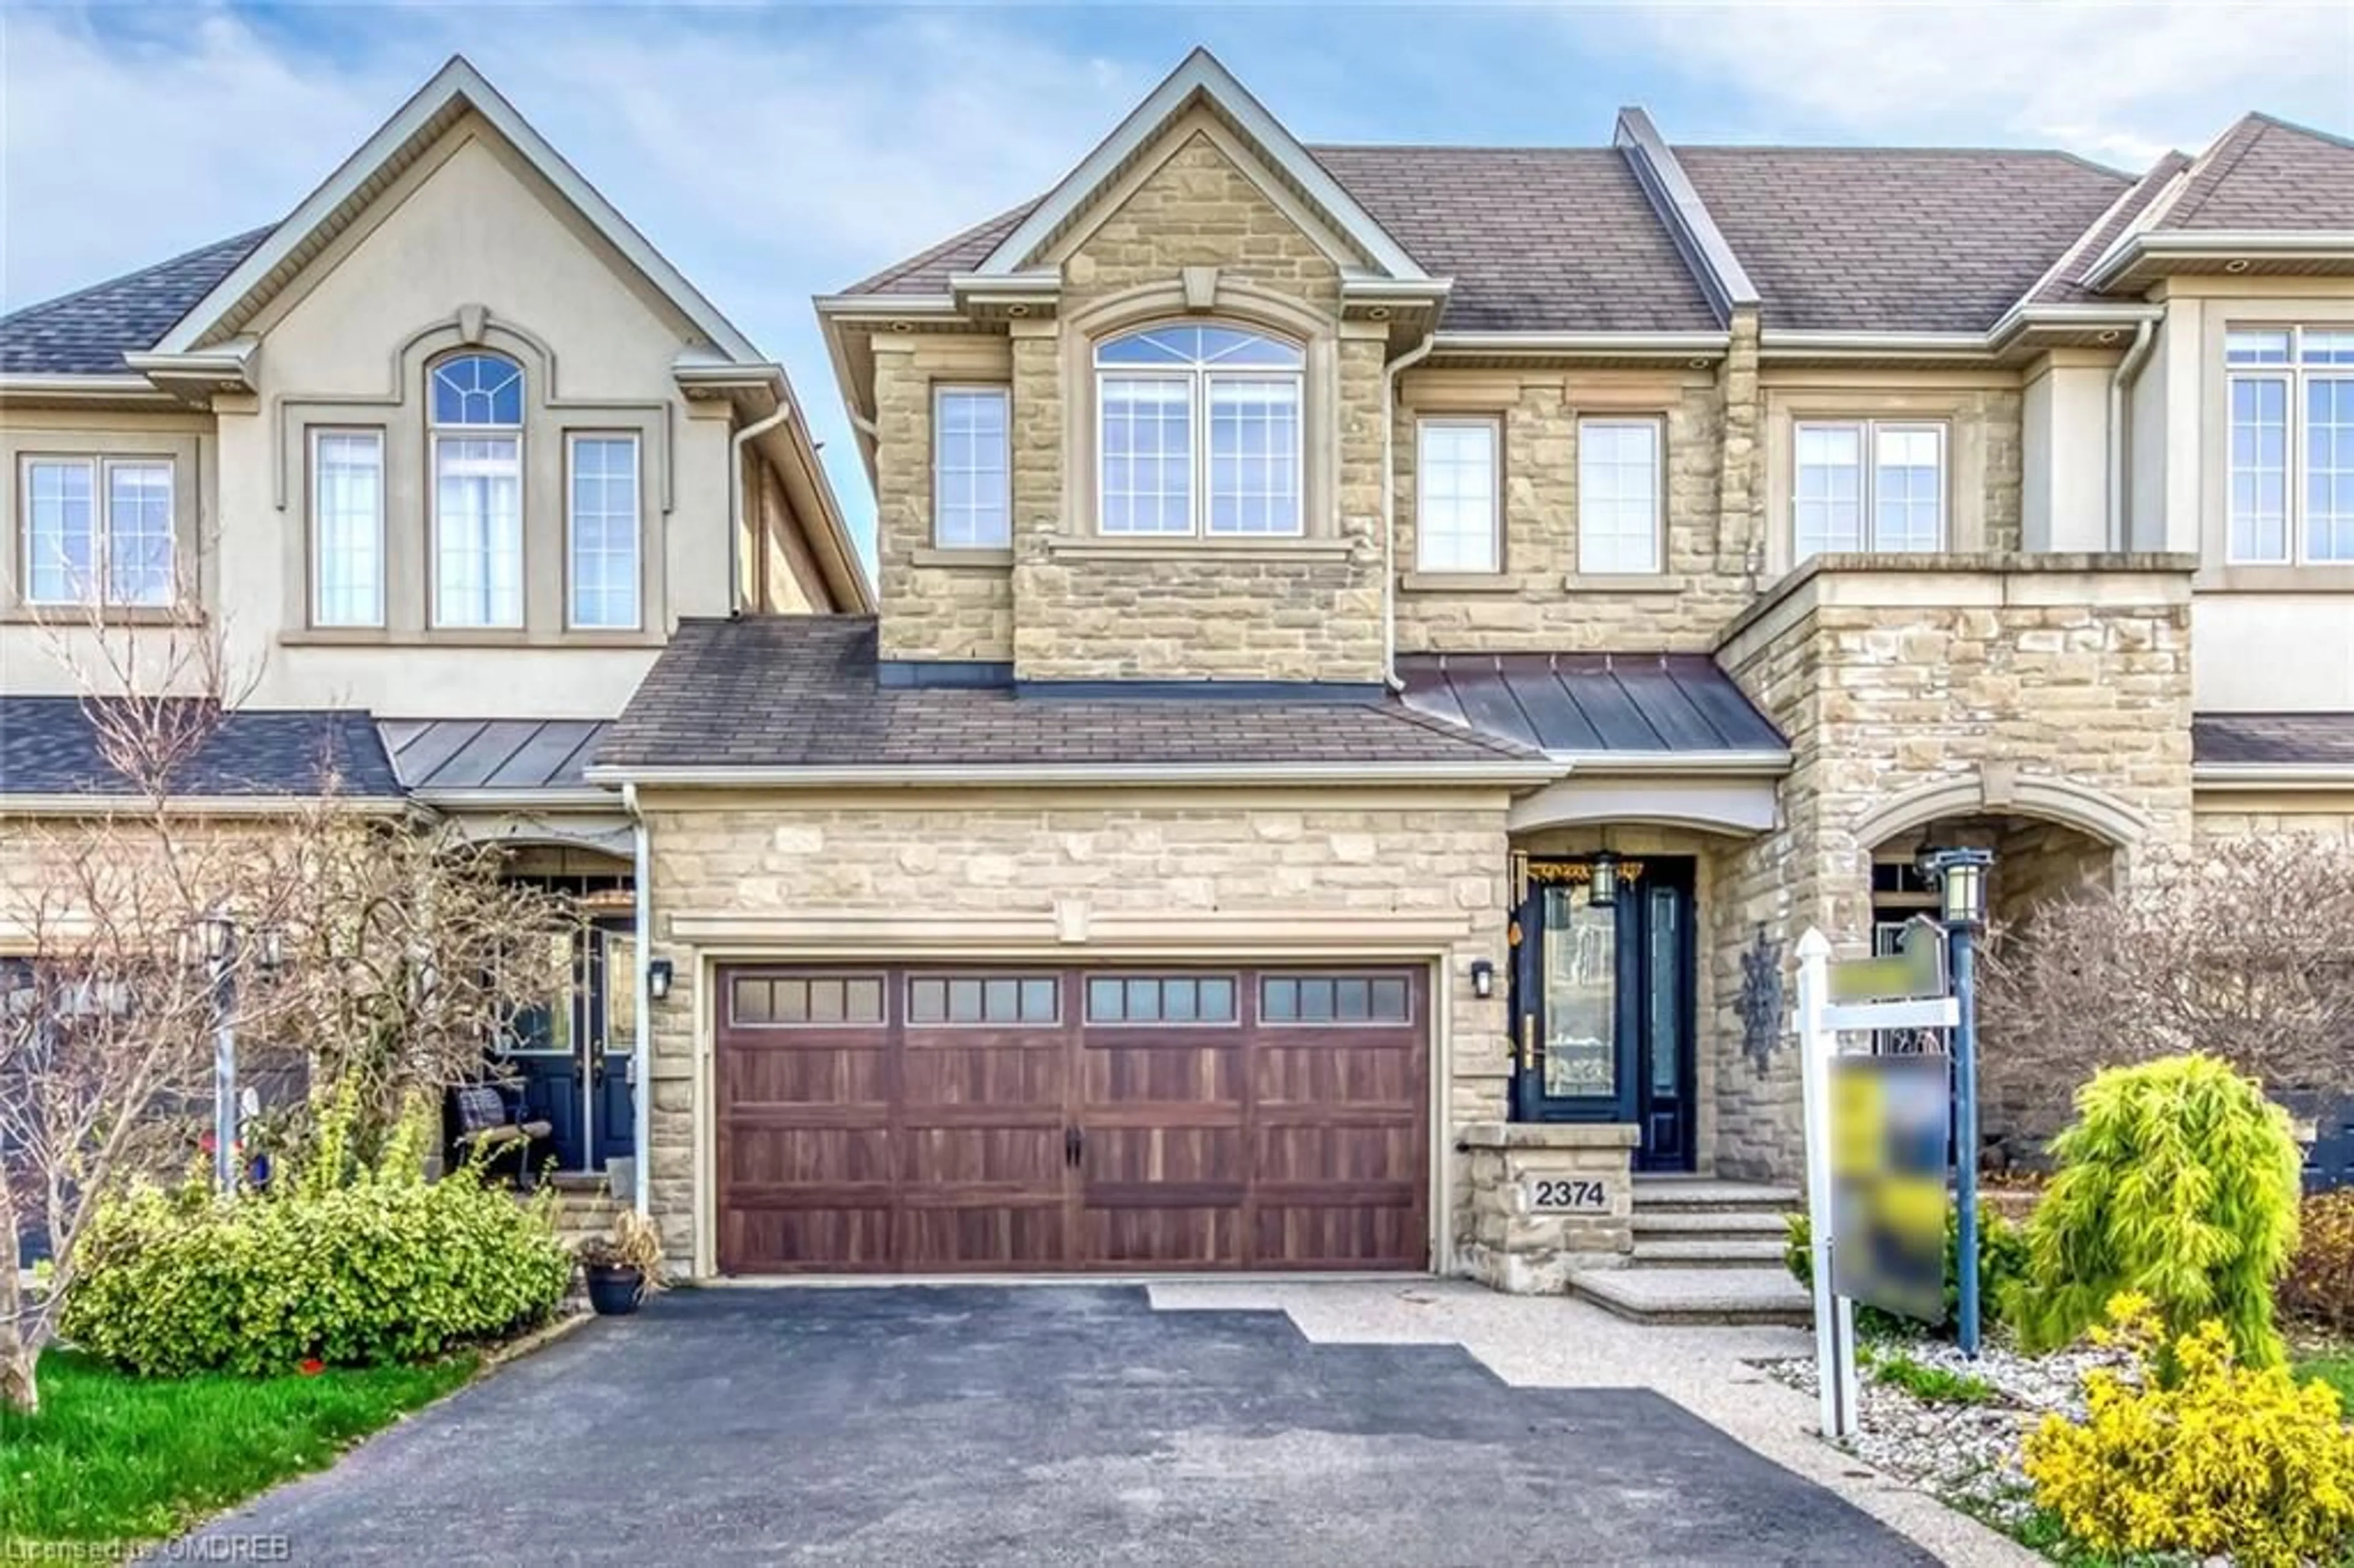 Home with brick exterior material for 2374 Wasaga Dr, Oakville Ontario L6H 0B7